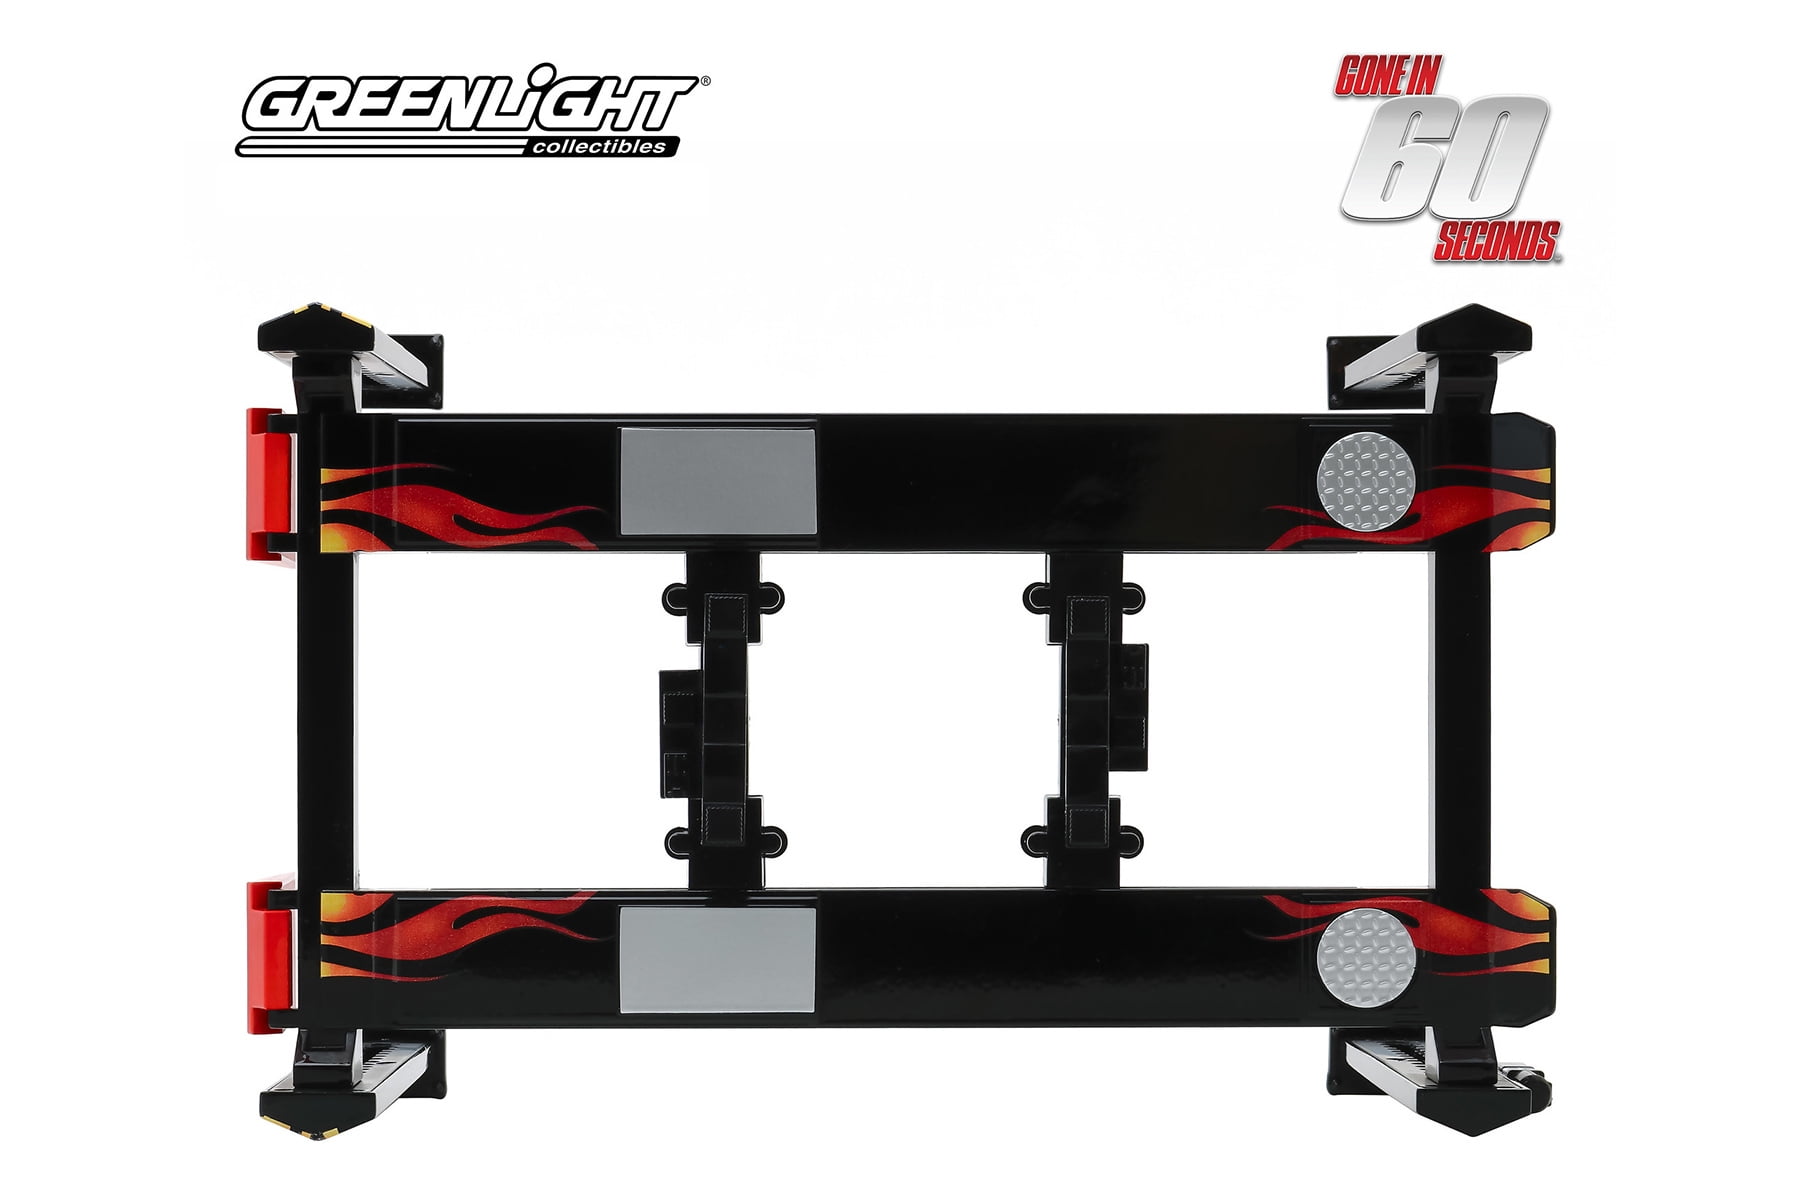 GONE IN 60 SECONDS 1:18th GREENLIGHT 13579 or 13580 4 post car lift UNION 76 